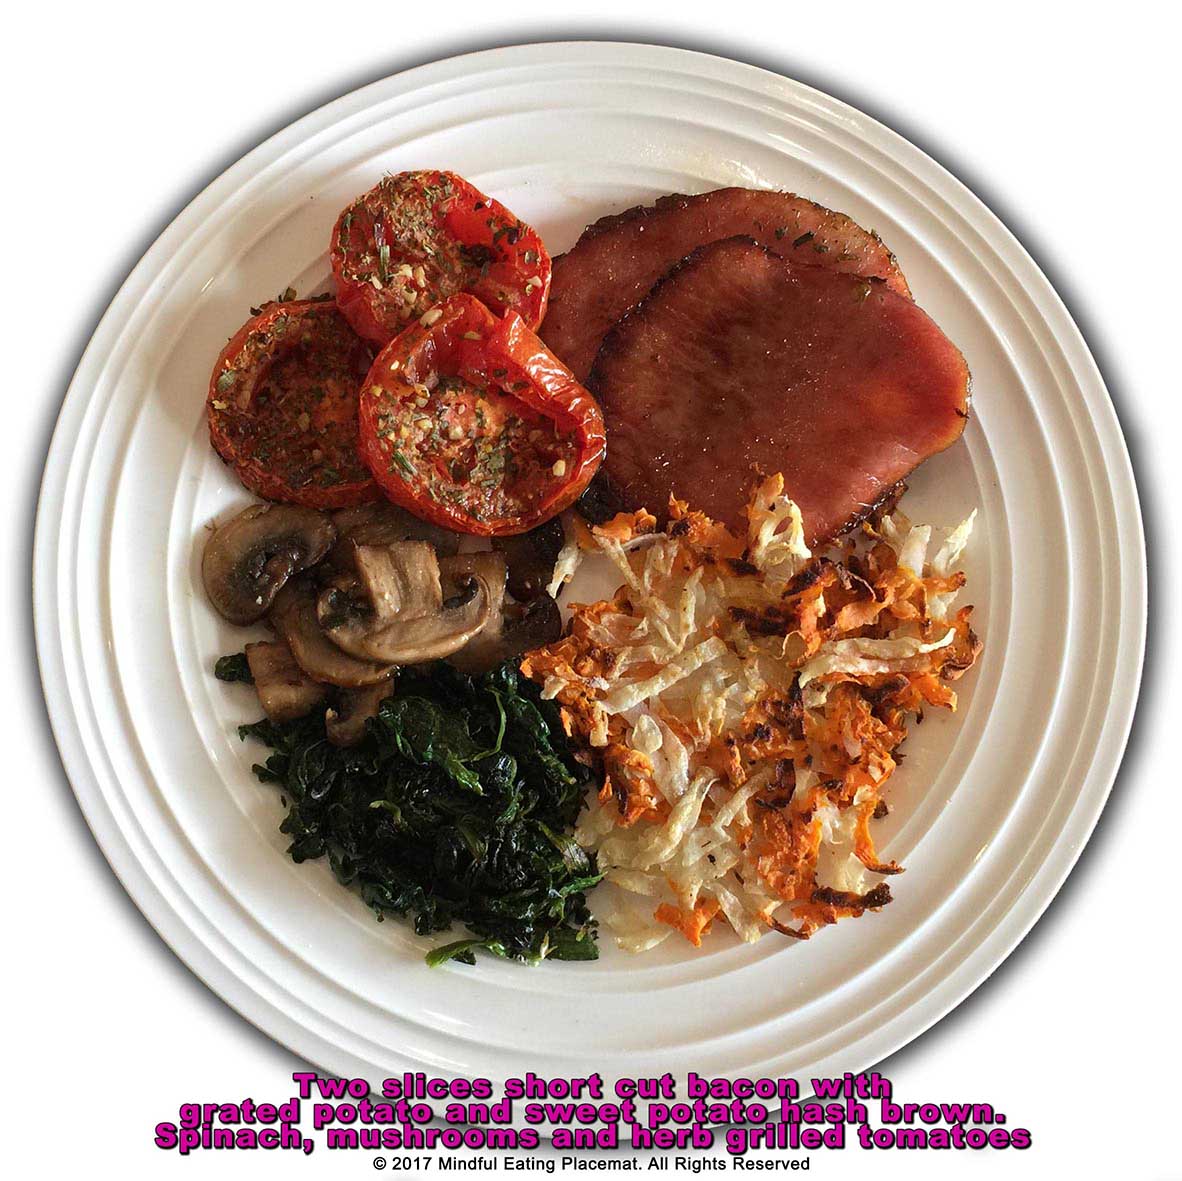 Two slices short cut bacon with sweet potato and potato hashbrown with grilled tomatoes, mushrooms and spinach